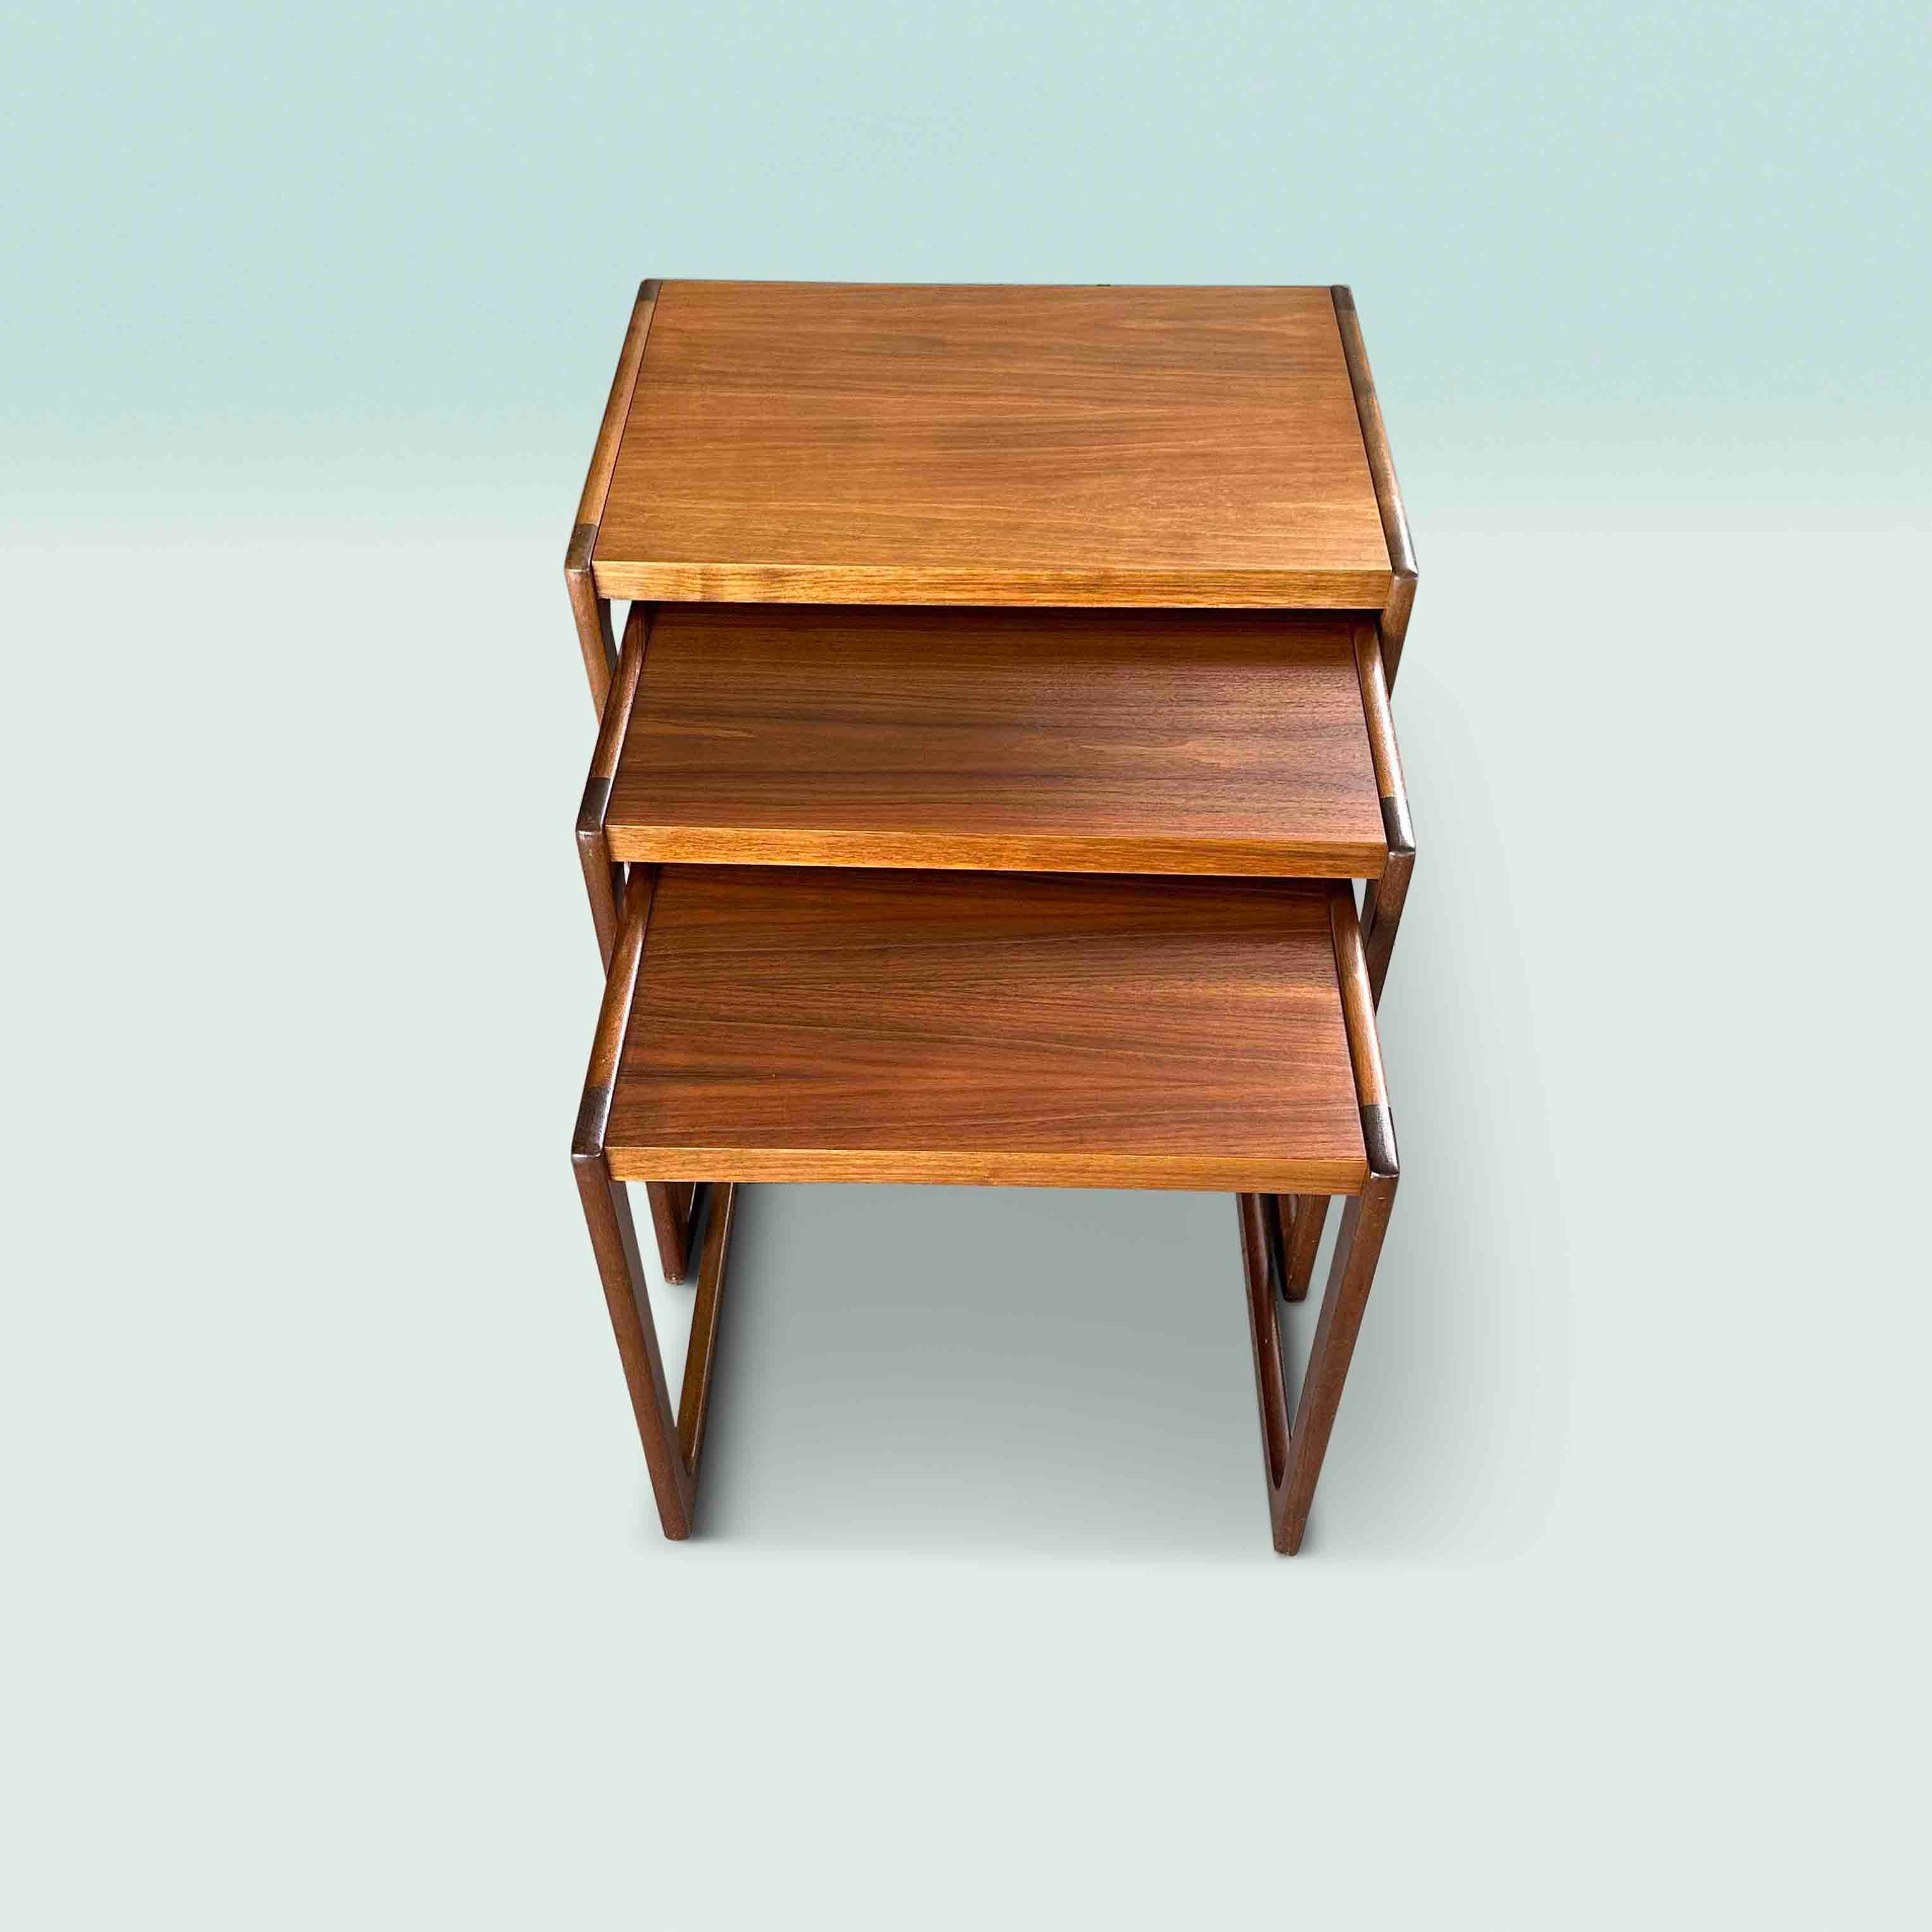 Set of 3 midcentury side tables in wood with a refined finish. These nesting tables were designed by the German Opal Möbel, circa 1960. The coffee tables slide into each other and are therefore easy to put away. The original label is still